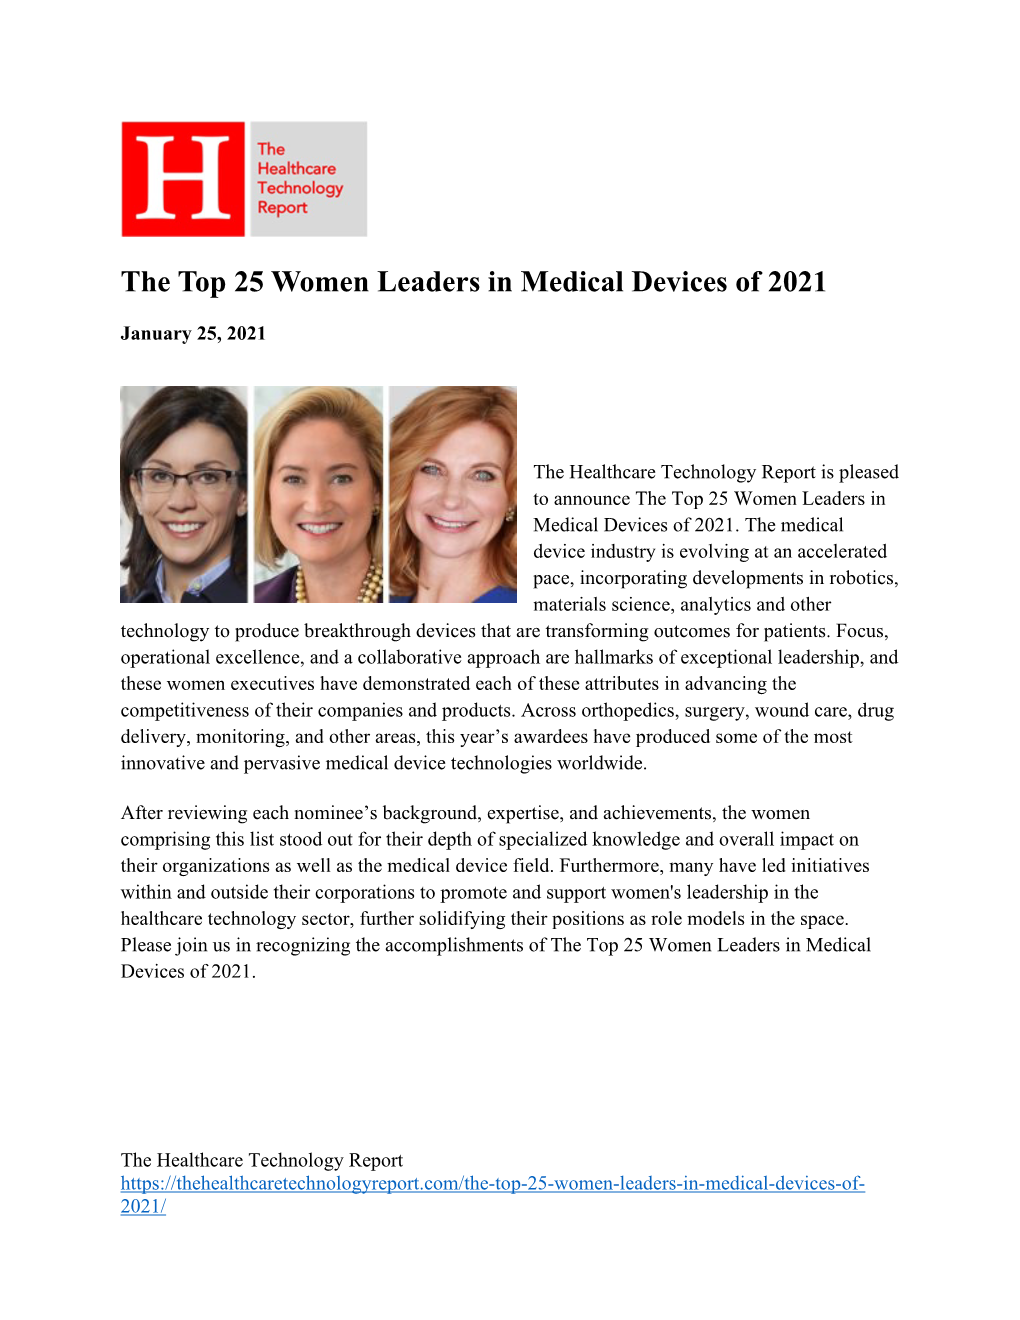 The Top 25 Women Leaders in Medical Devices of 2021